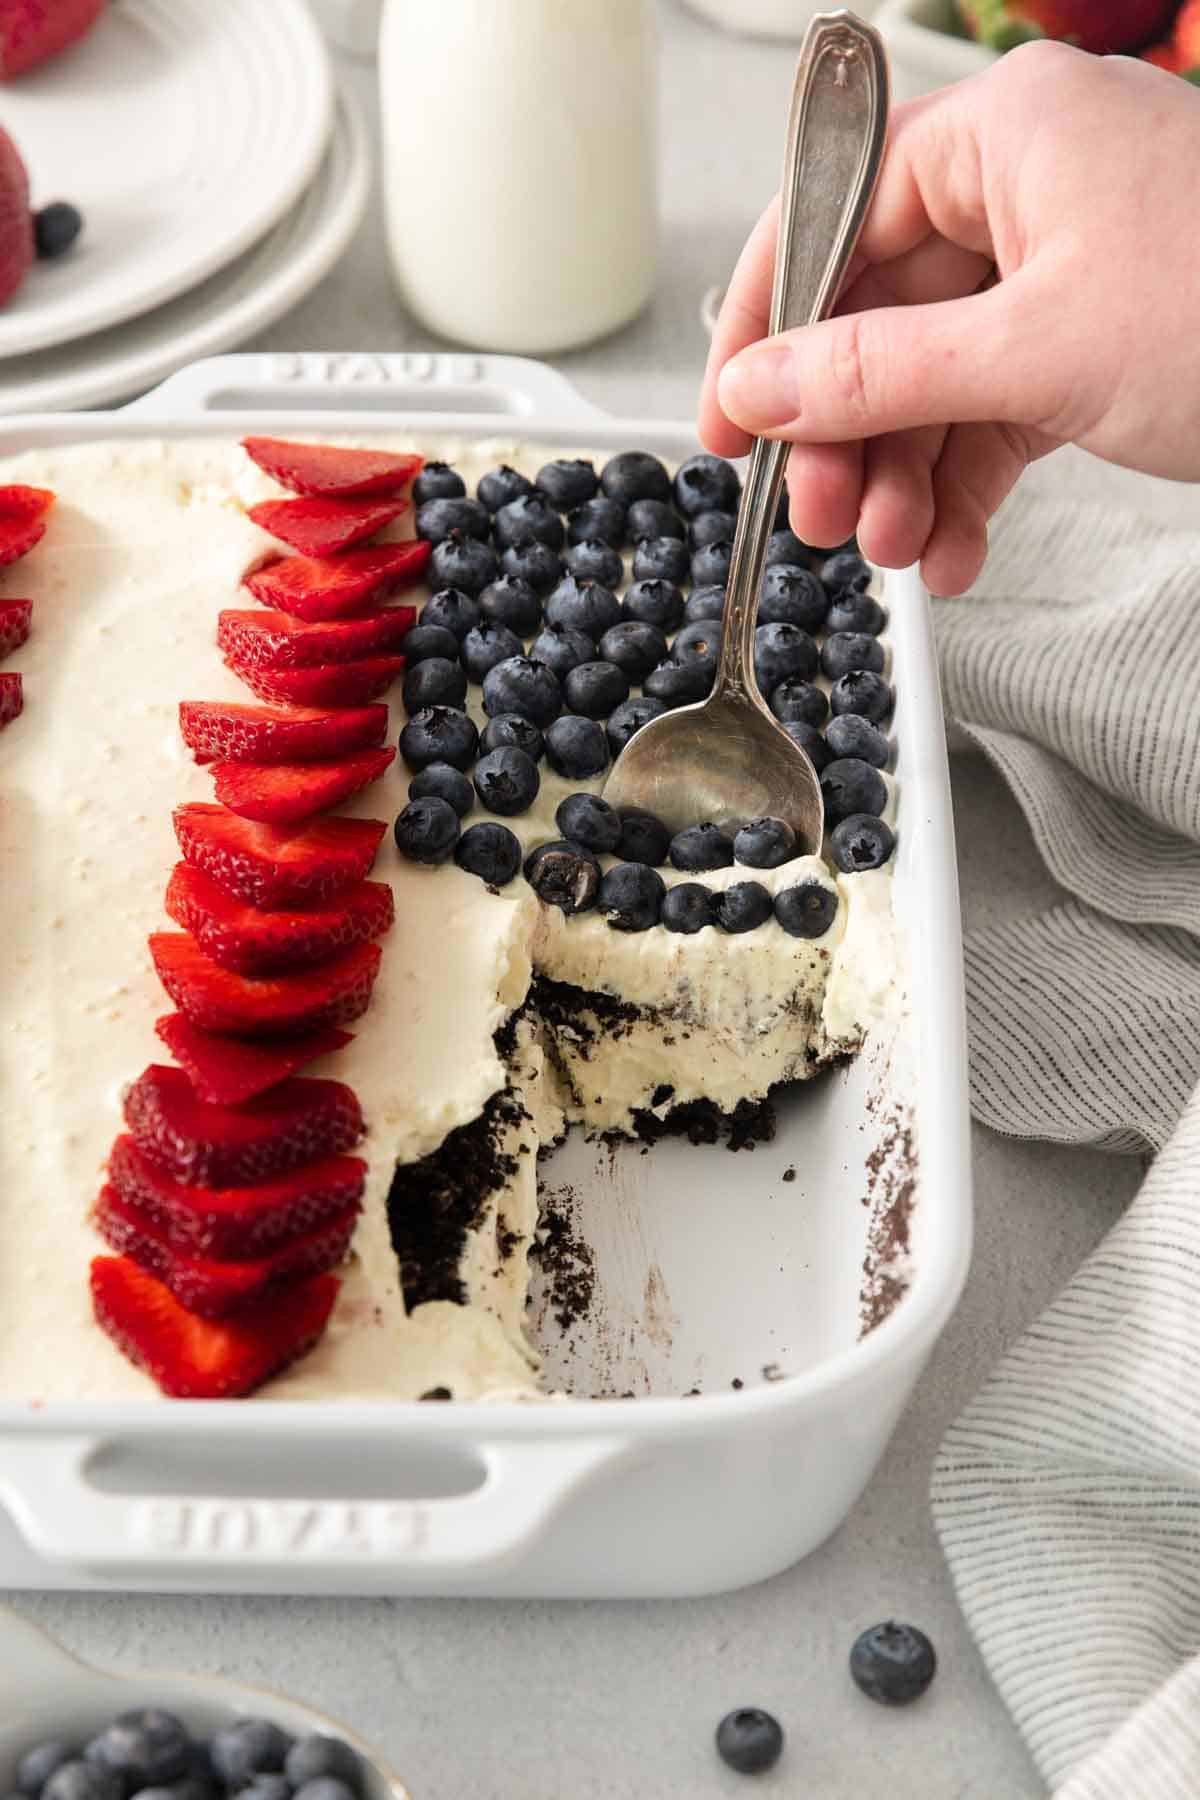 4th of July or Memorial Day - Red, White and Blue Oreo Dirt Dessert